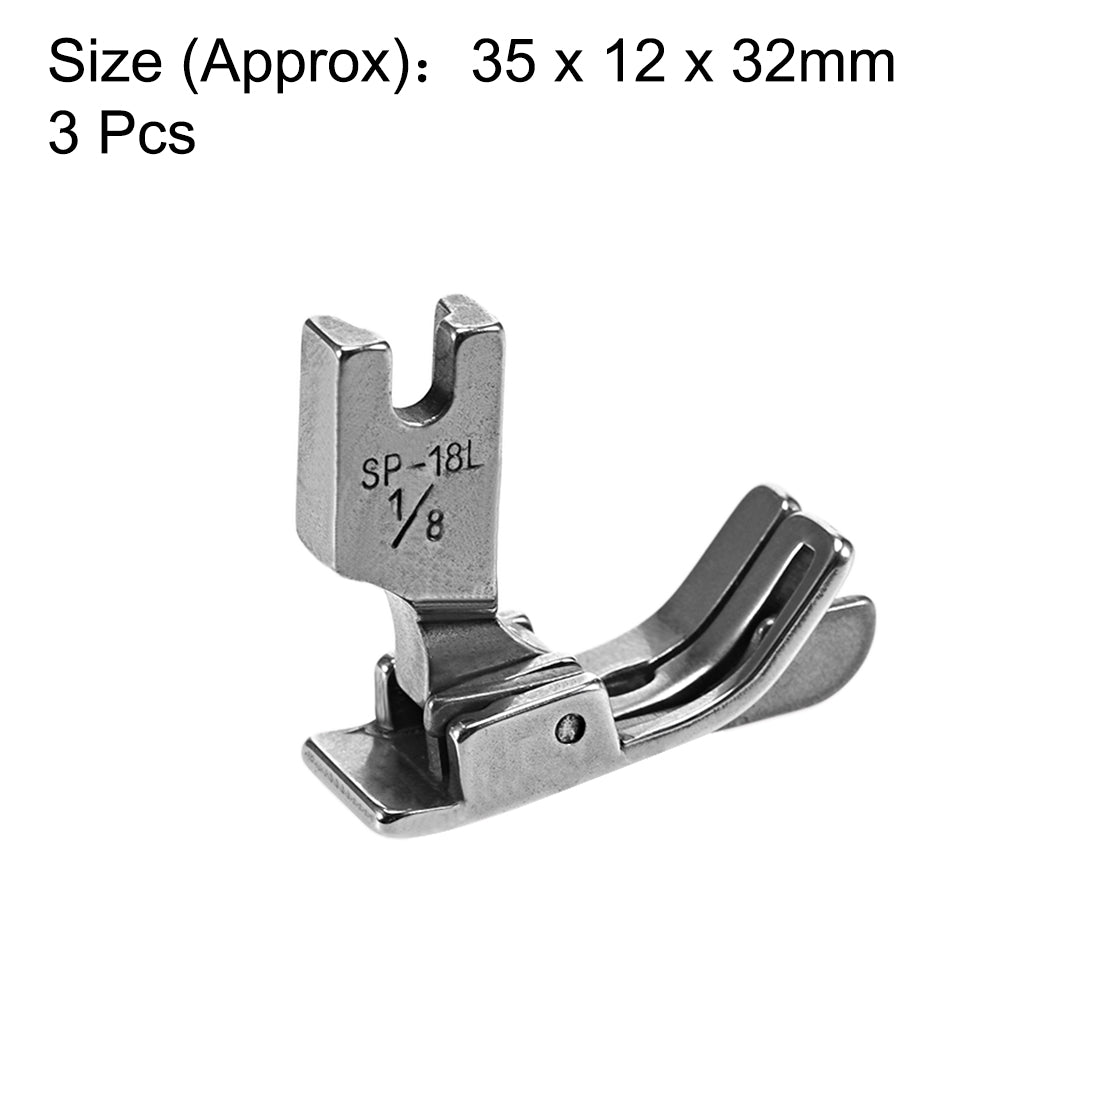 uxcell Uxcell #SP-18L Industrial Sewing Machine Hinged Presser Foot  with Left Guide 1/8" (3mm) 3pcs